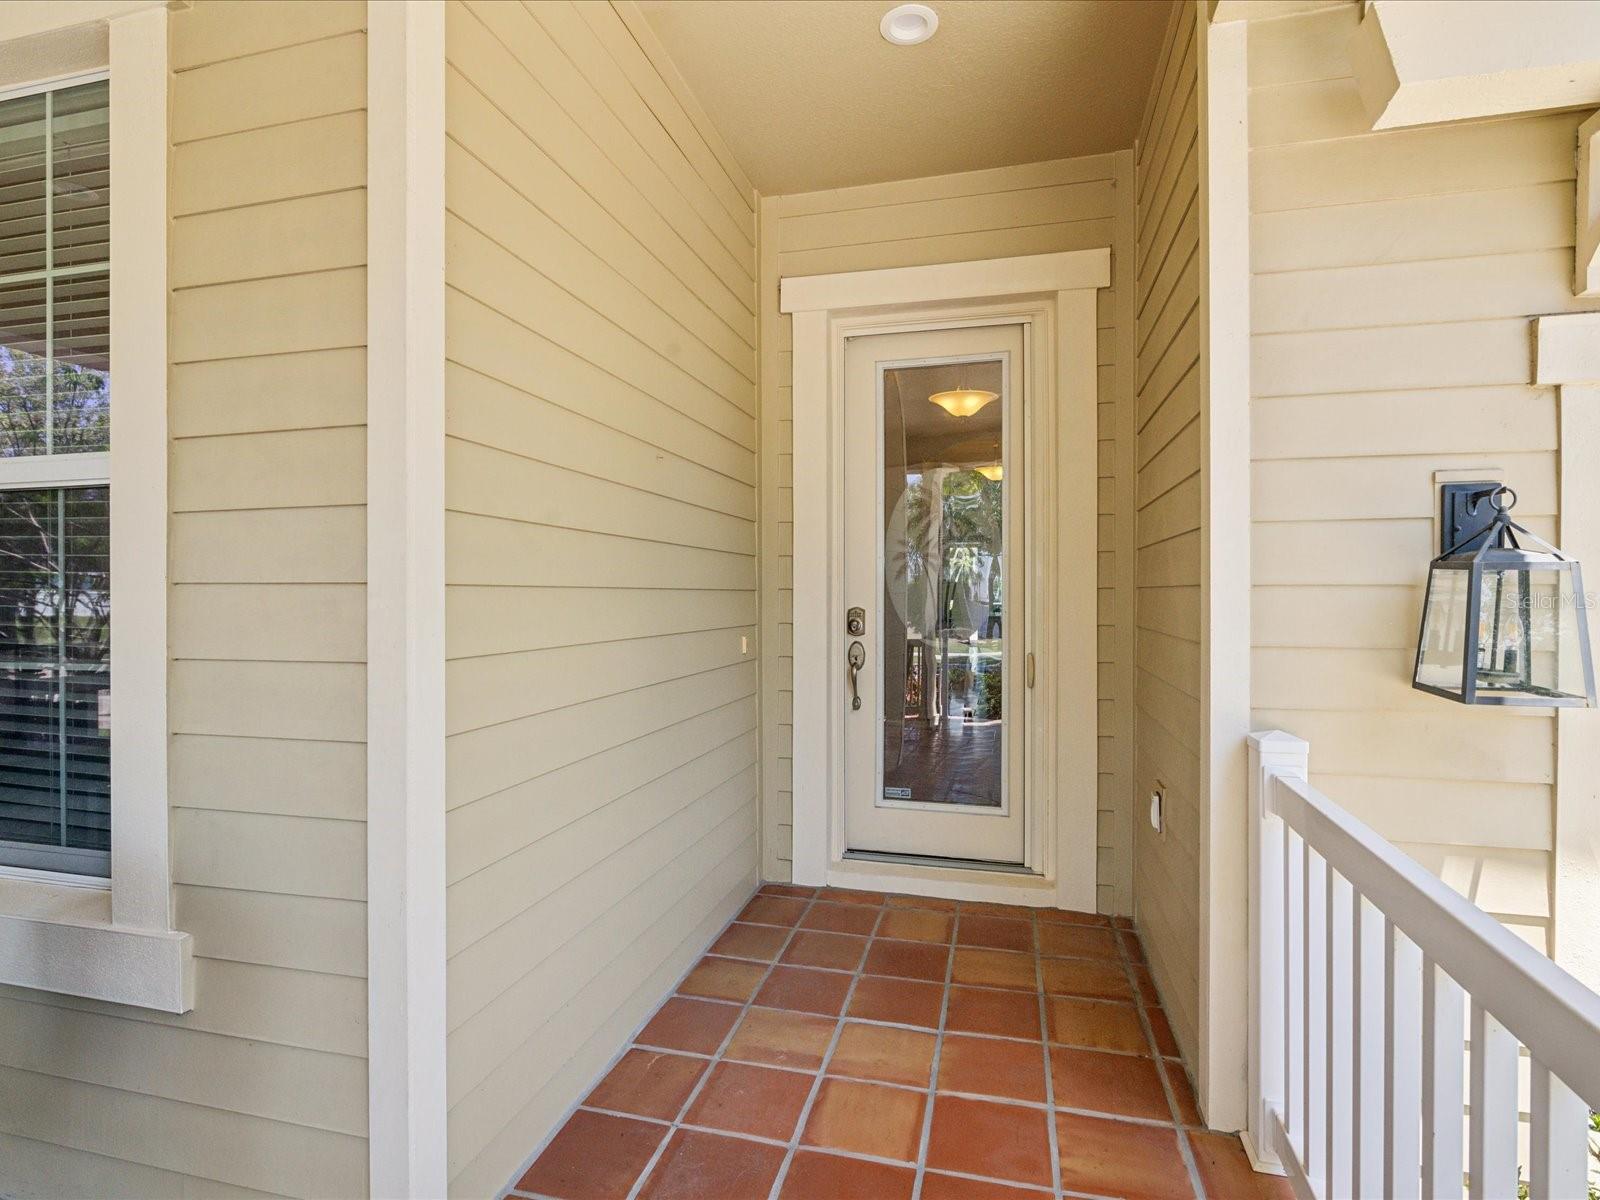 The front door is in its own alcove that protects from the elements.